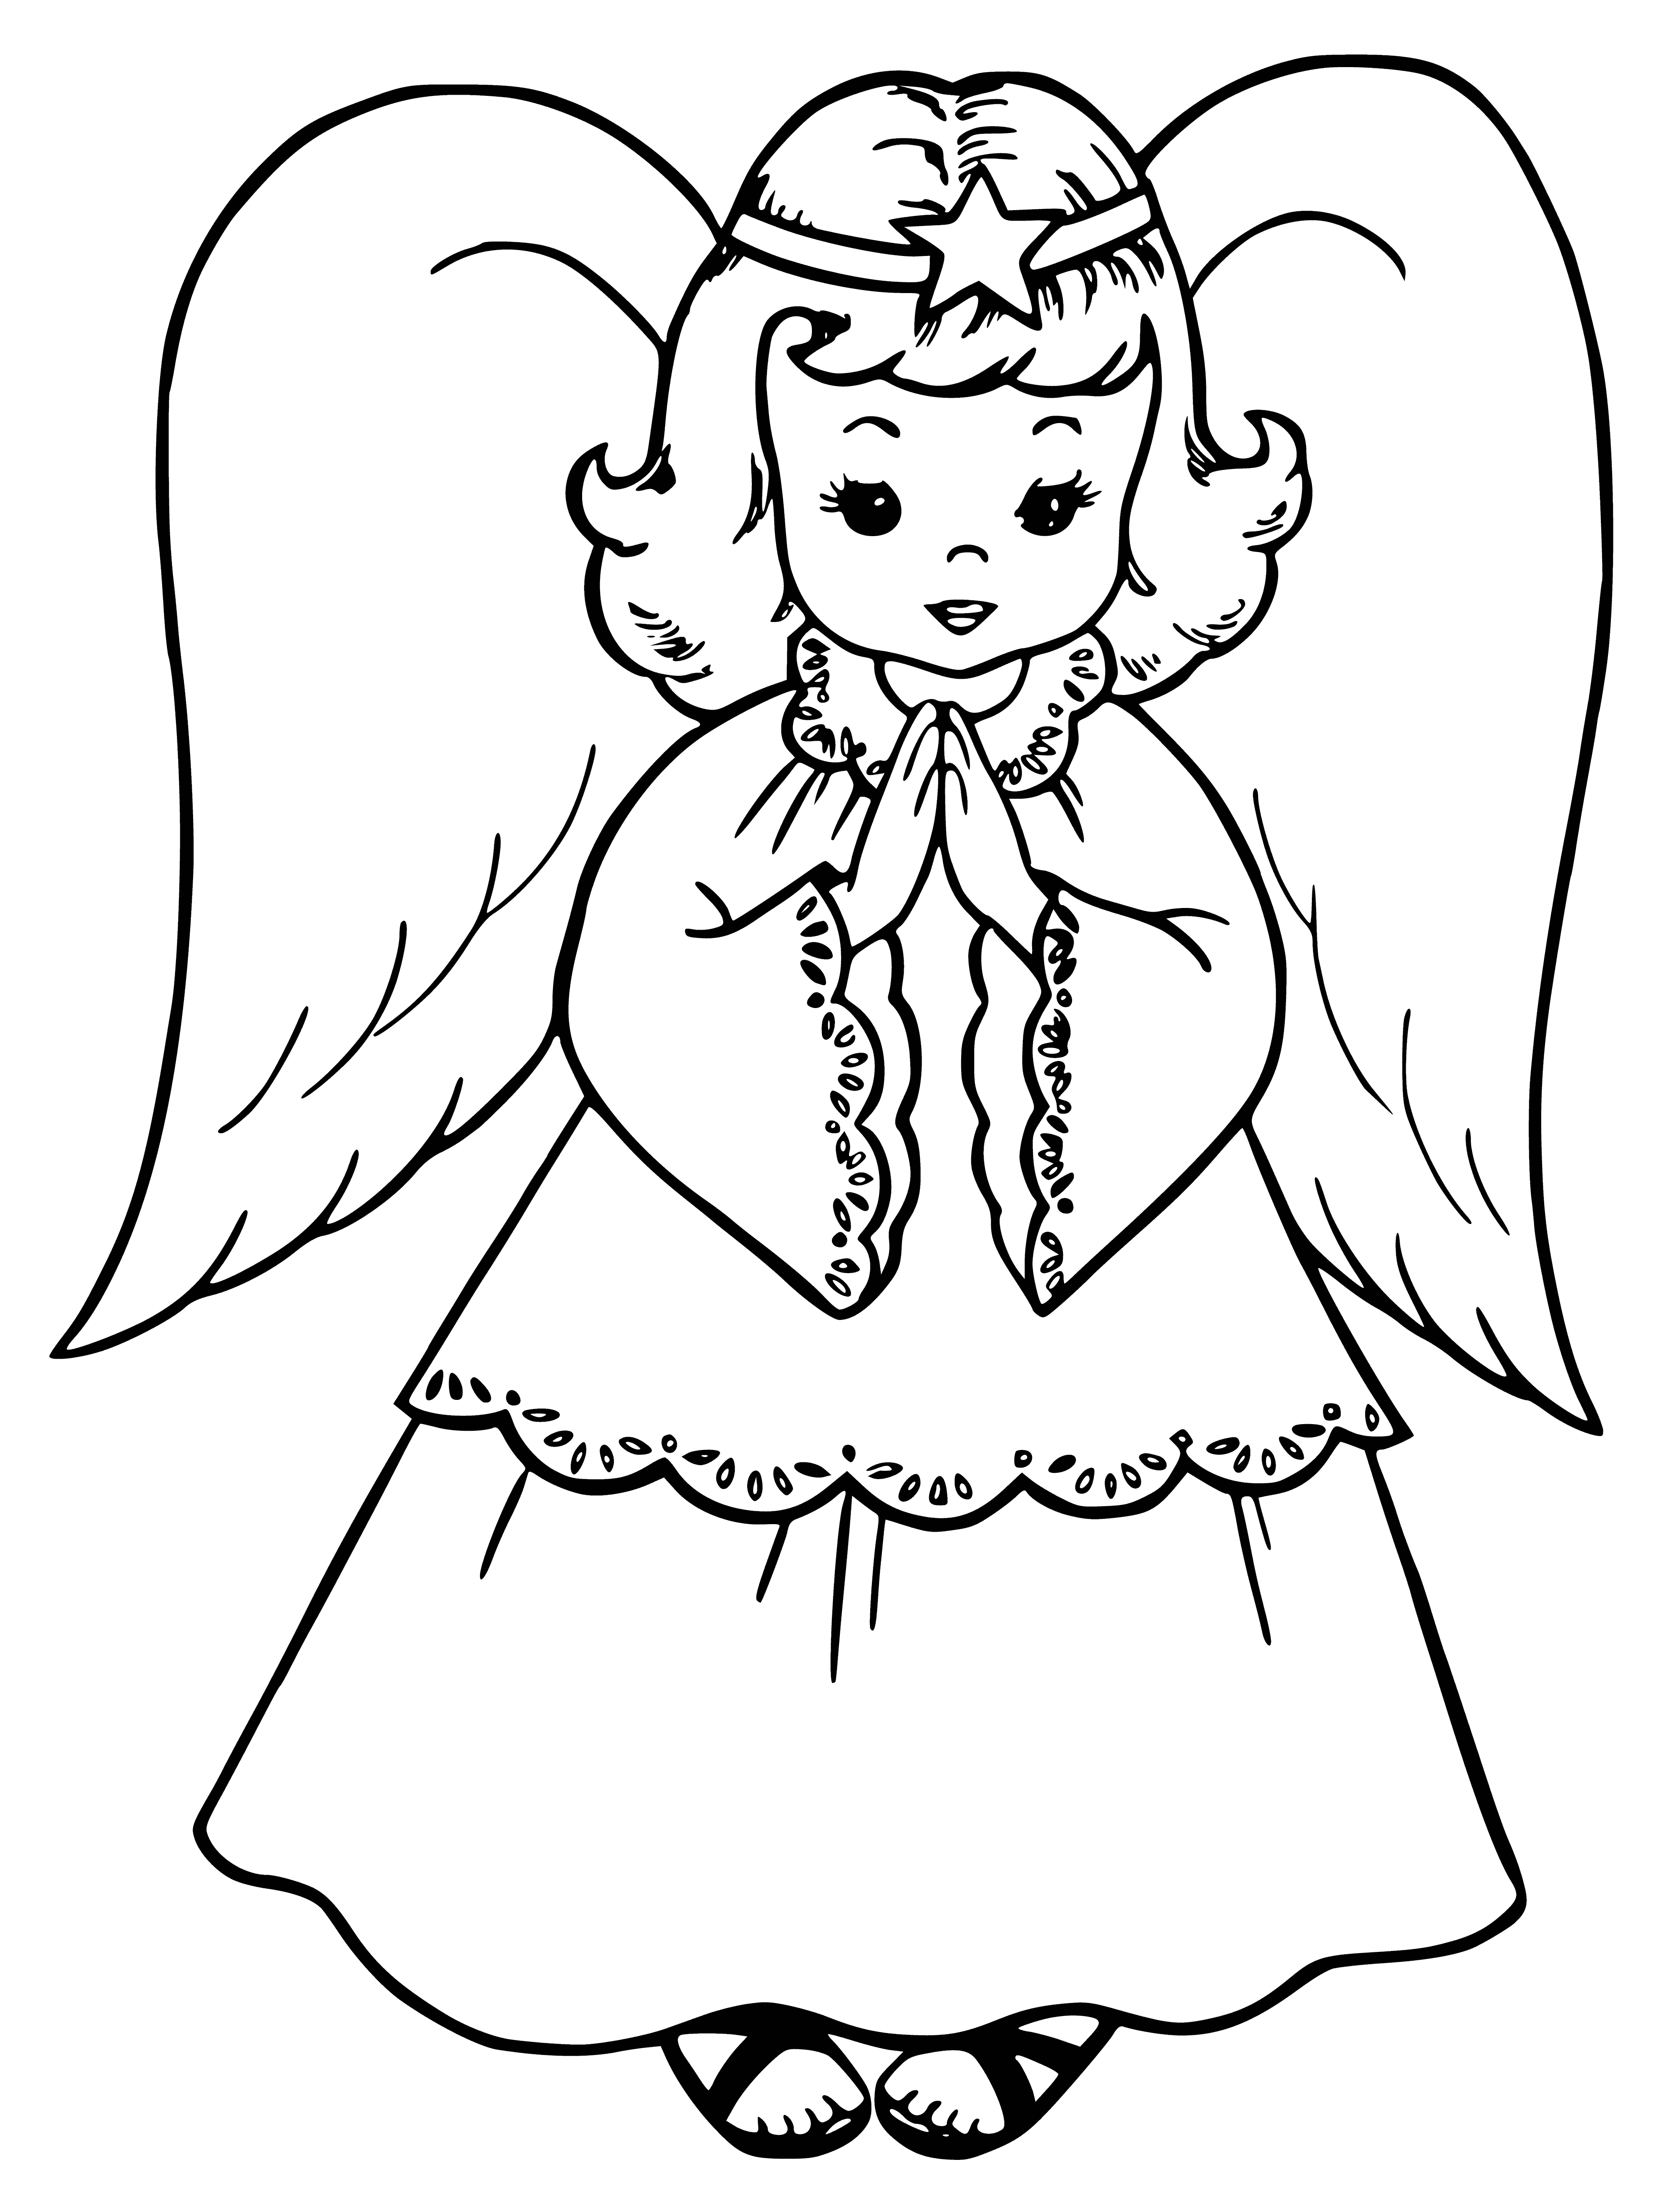 coloring page: Girl in coloring page wears white dress, angel wings, halo, holds white feather.